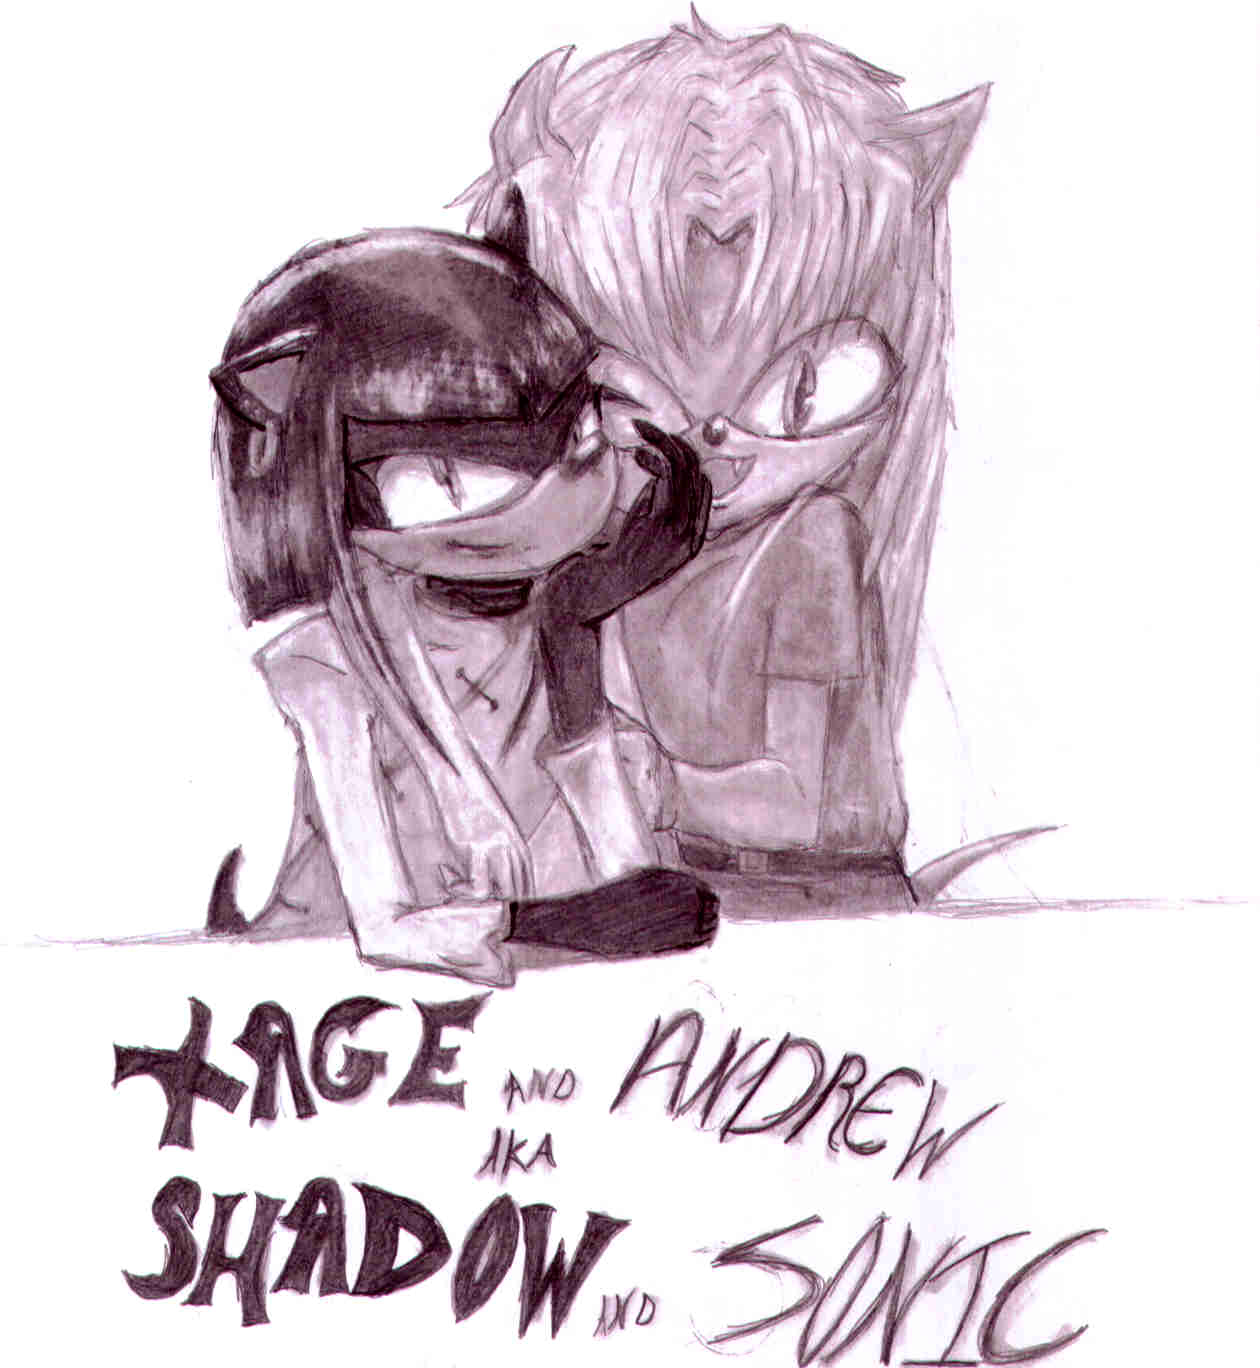 Kage and Andrew AKA Shadow and Sonic by Xanzyos